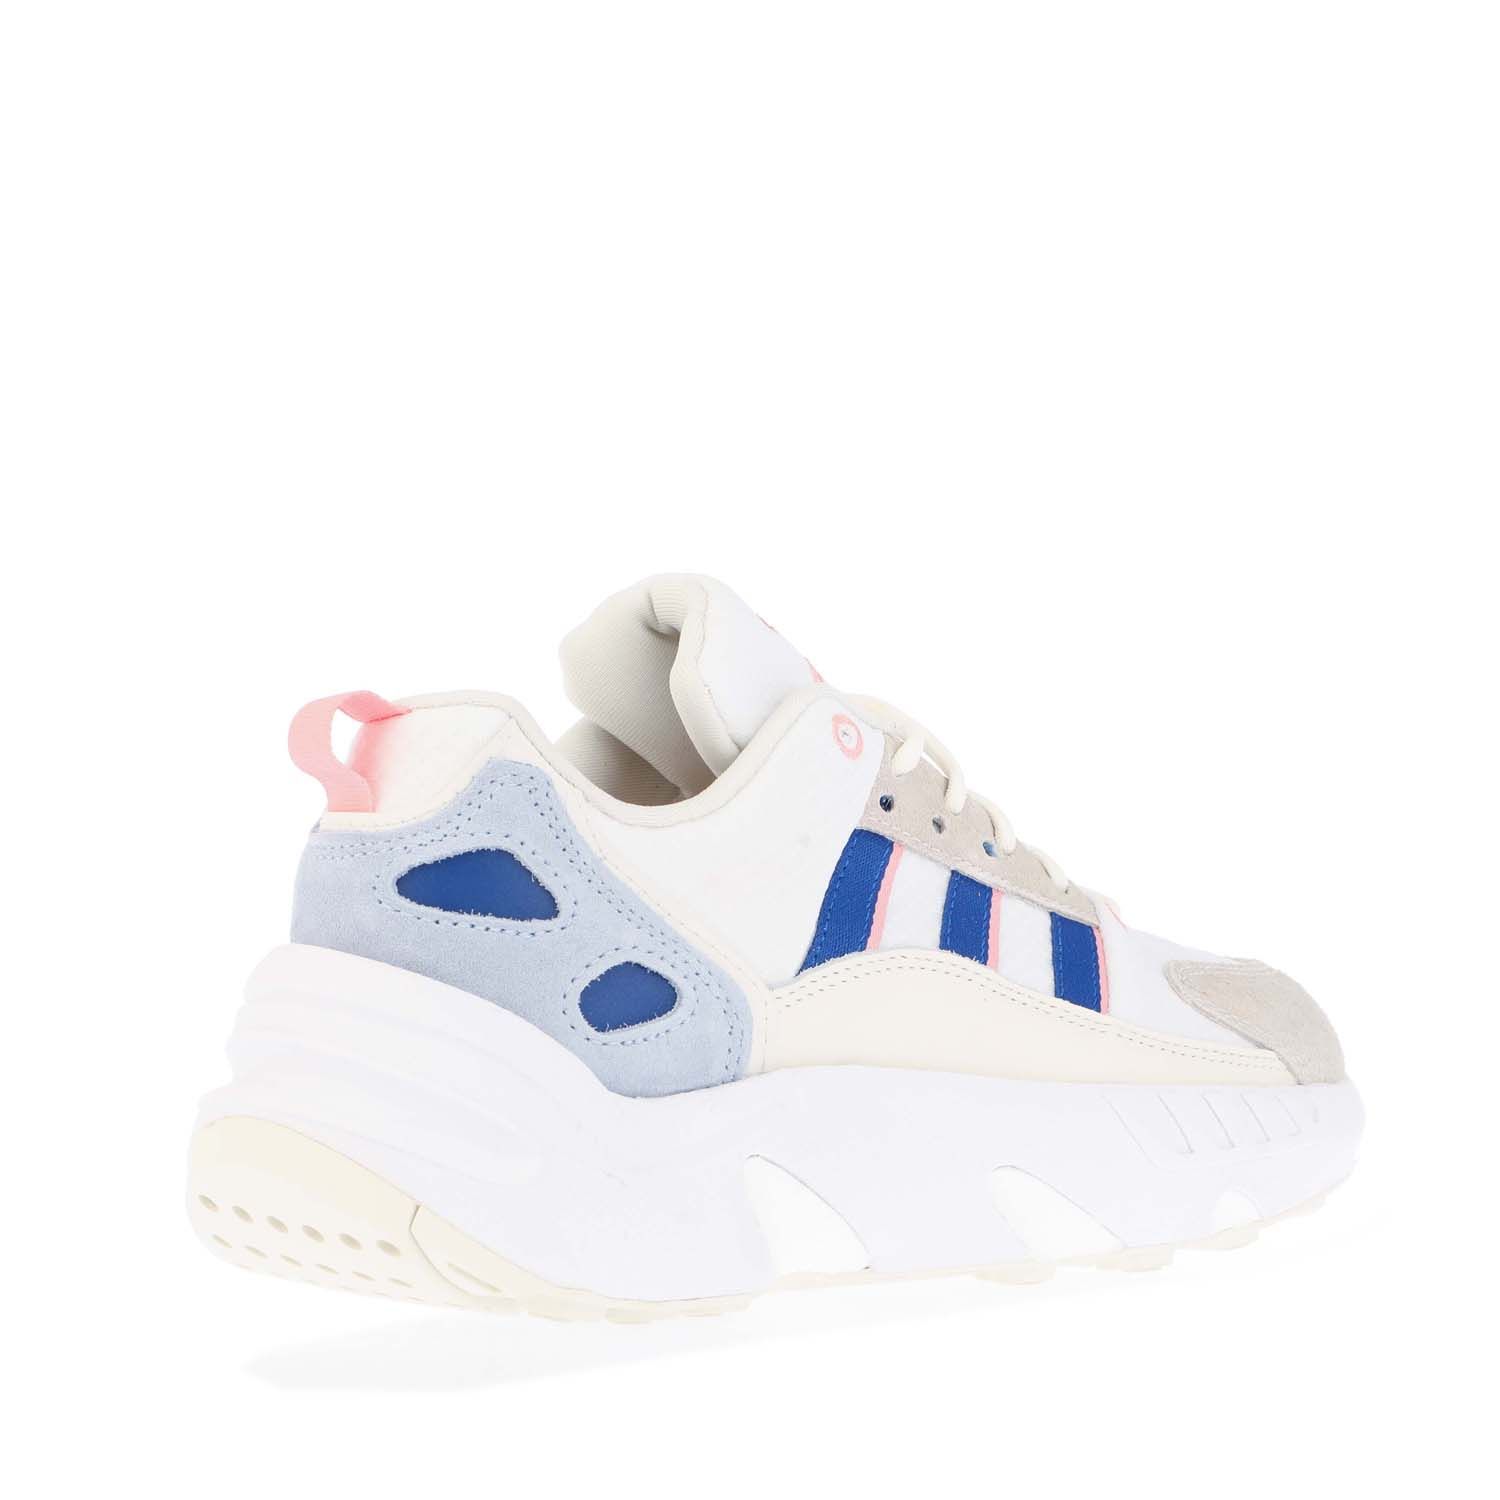 Off White adidas Originals Womens ZX 22 BOOST Trainers - Get The Label